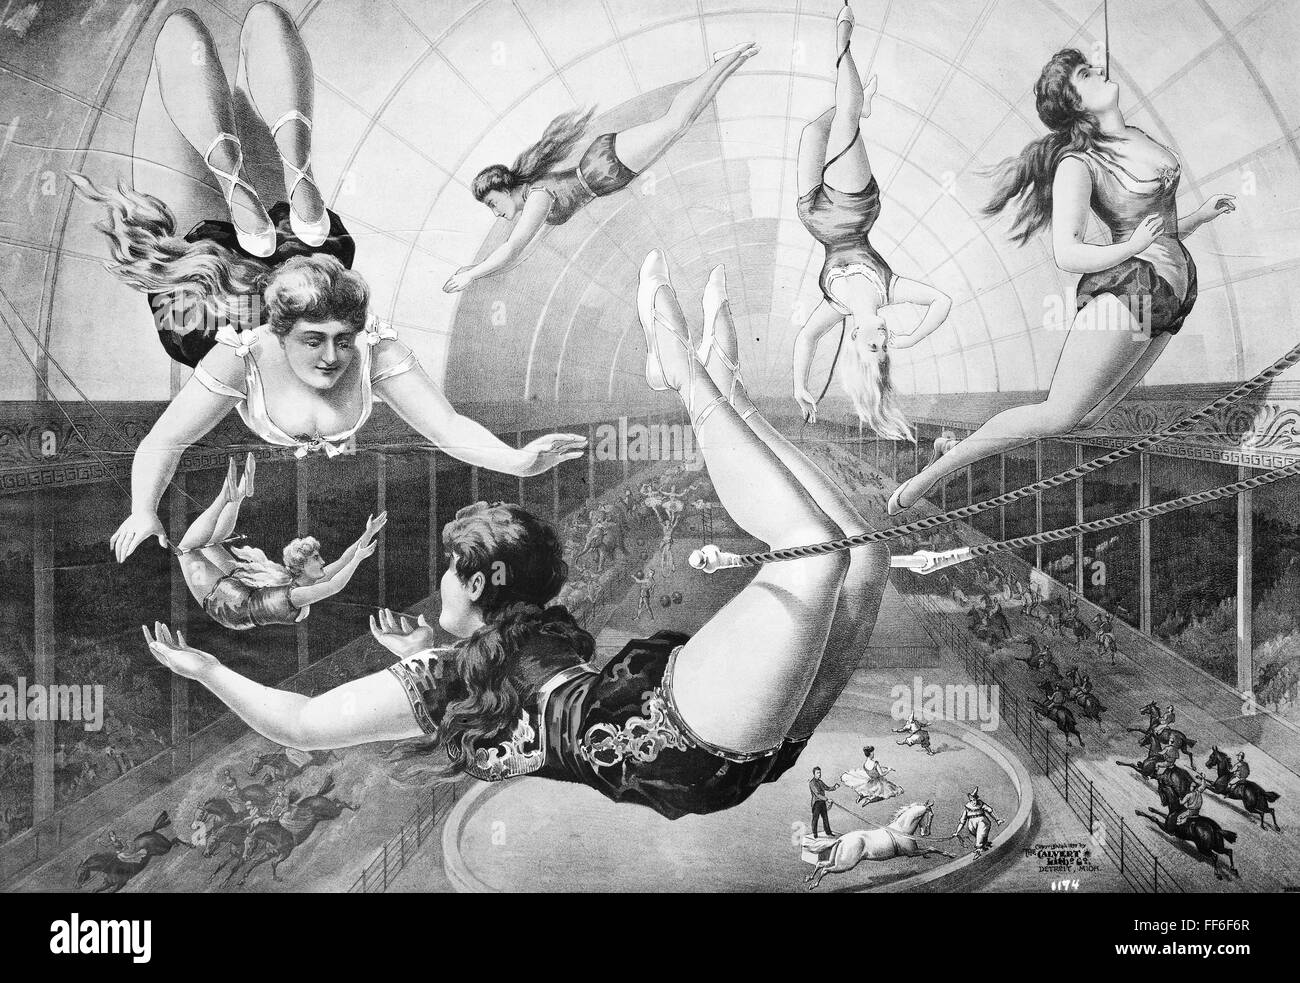 TRAPEZE ARTISTS, 1890. /nAmerican lithograph poster, 1890. Stock Photo